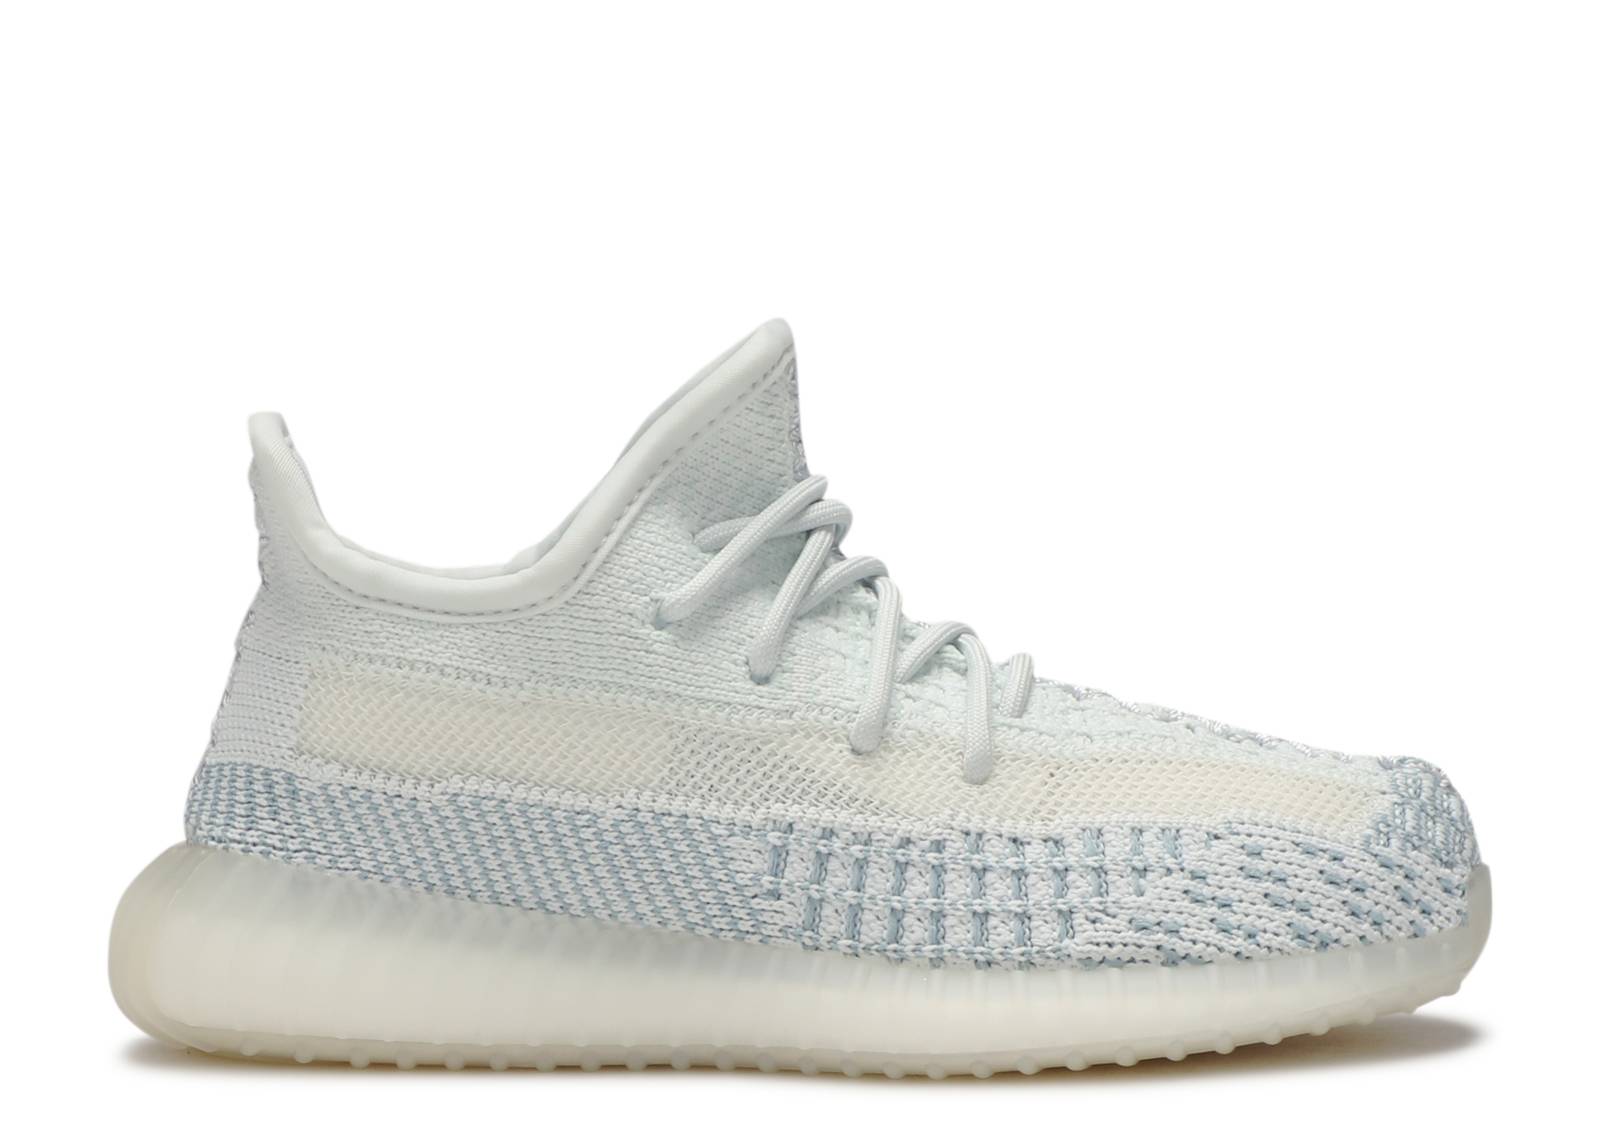 Yeezy Boost 350 V2 Infant 'Cloud White Non-Reflective'Color:White,Size:0